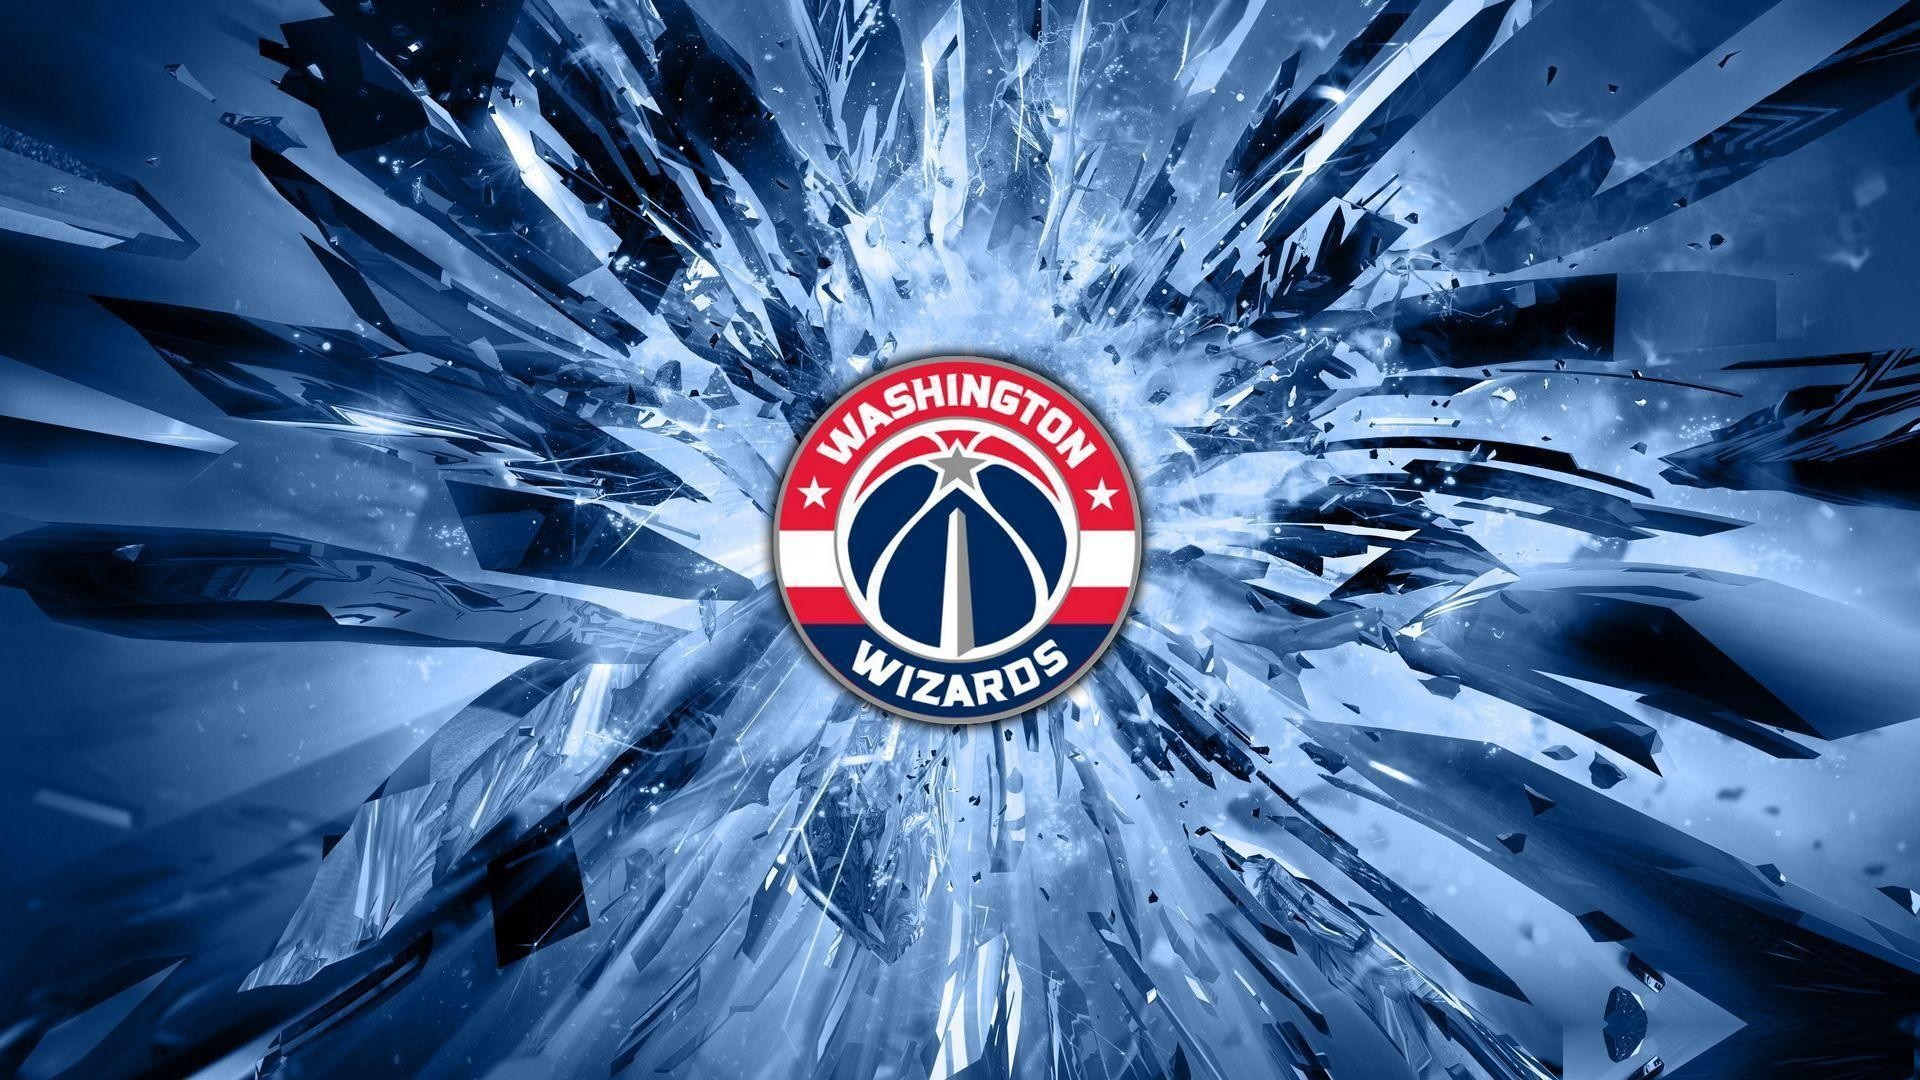 Wallpaper Desktop Washington Wizards HD with high-resolution 1920x1080 pixel. You can use this wallpaper for your Desktop Computer Backgrounds, Windows or Mac Screensavers, iPhone Lock screen, Tablet or Android and another Mobile Phone device